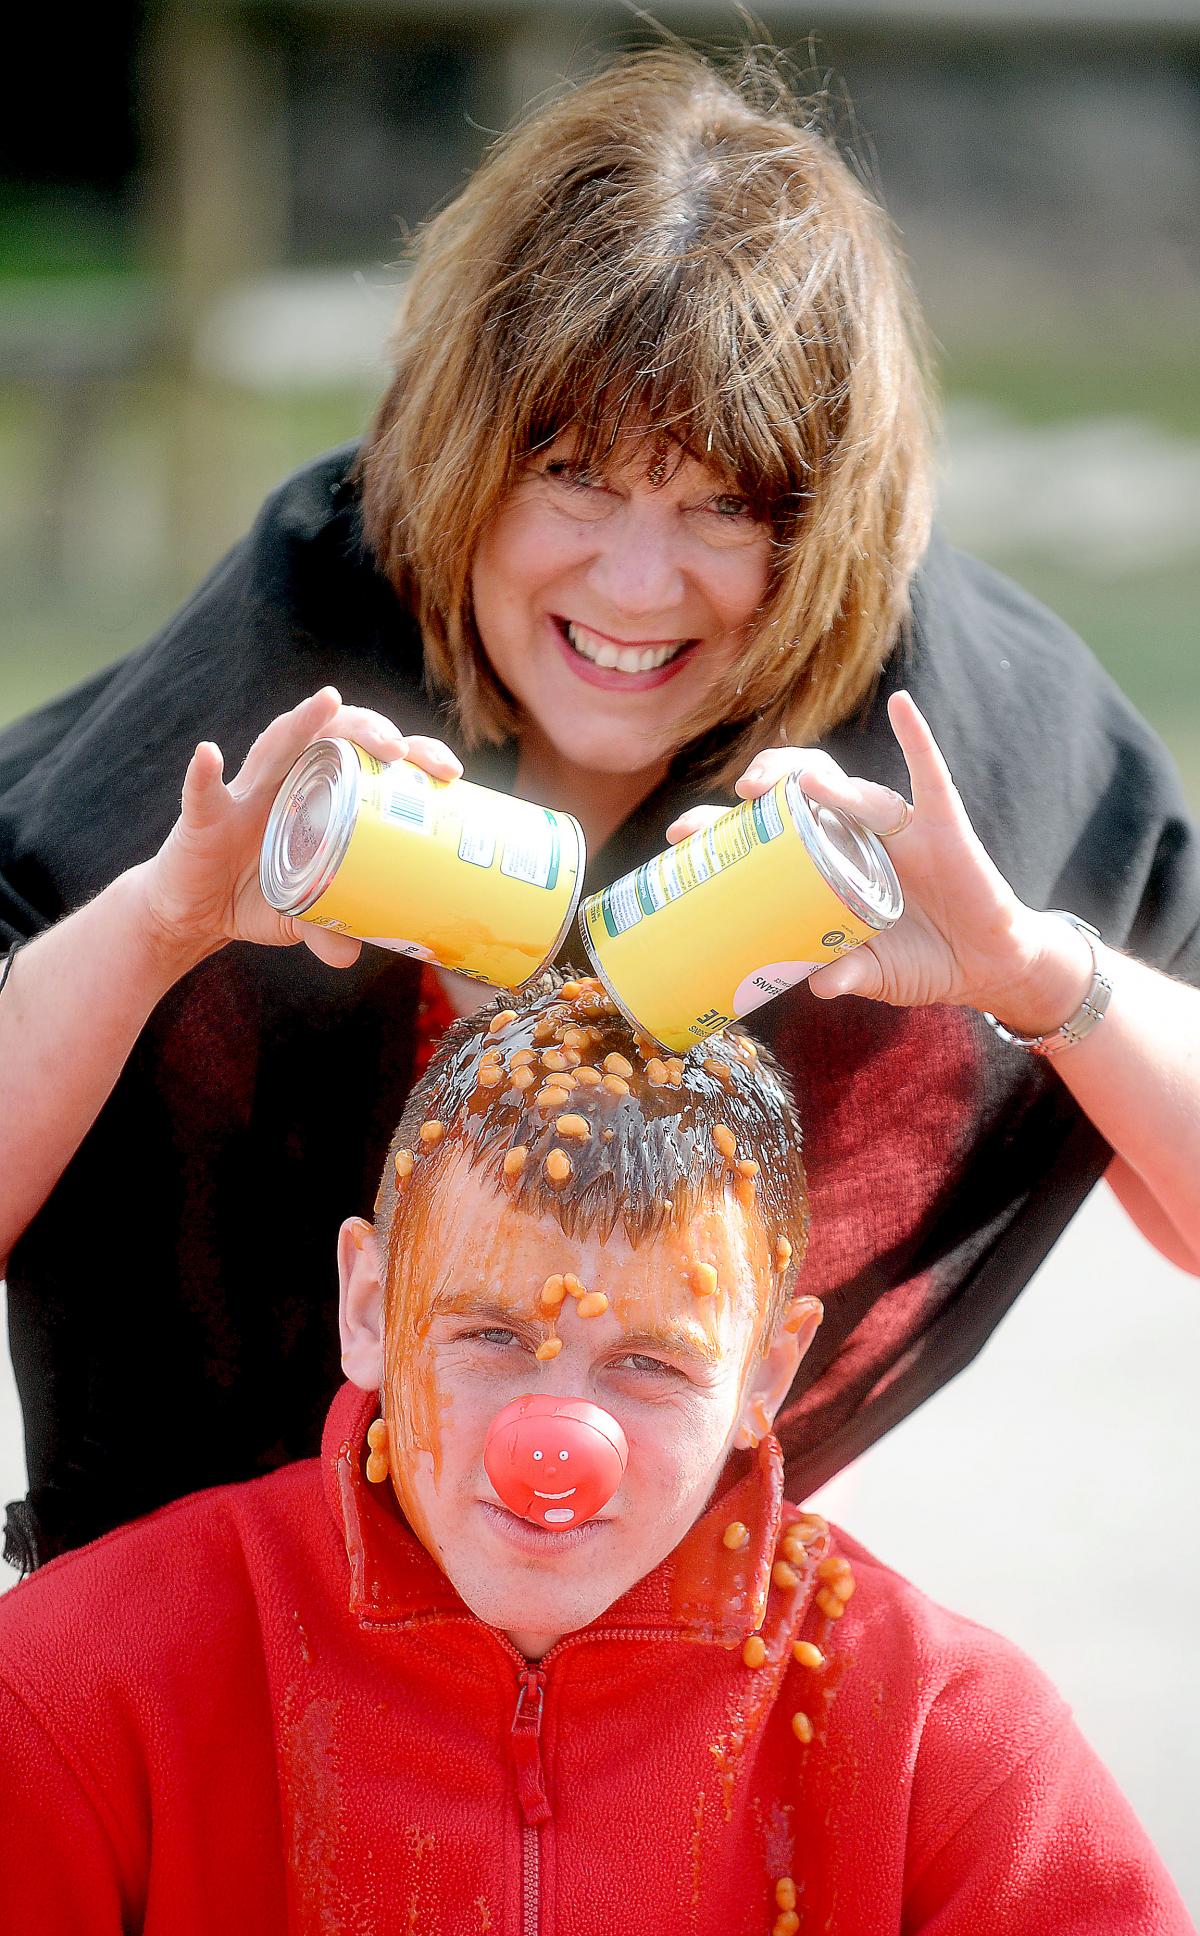 Nancy Hutchinson pours beans over Karl Illingworth's head to raise money for Comic Relief as part of the Red Nose Day activities at Heaton St Barnabas School.